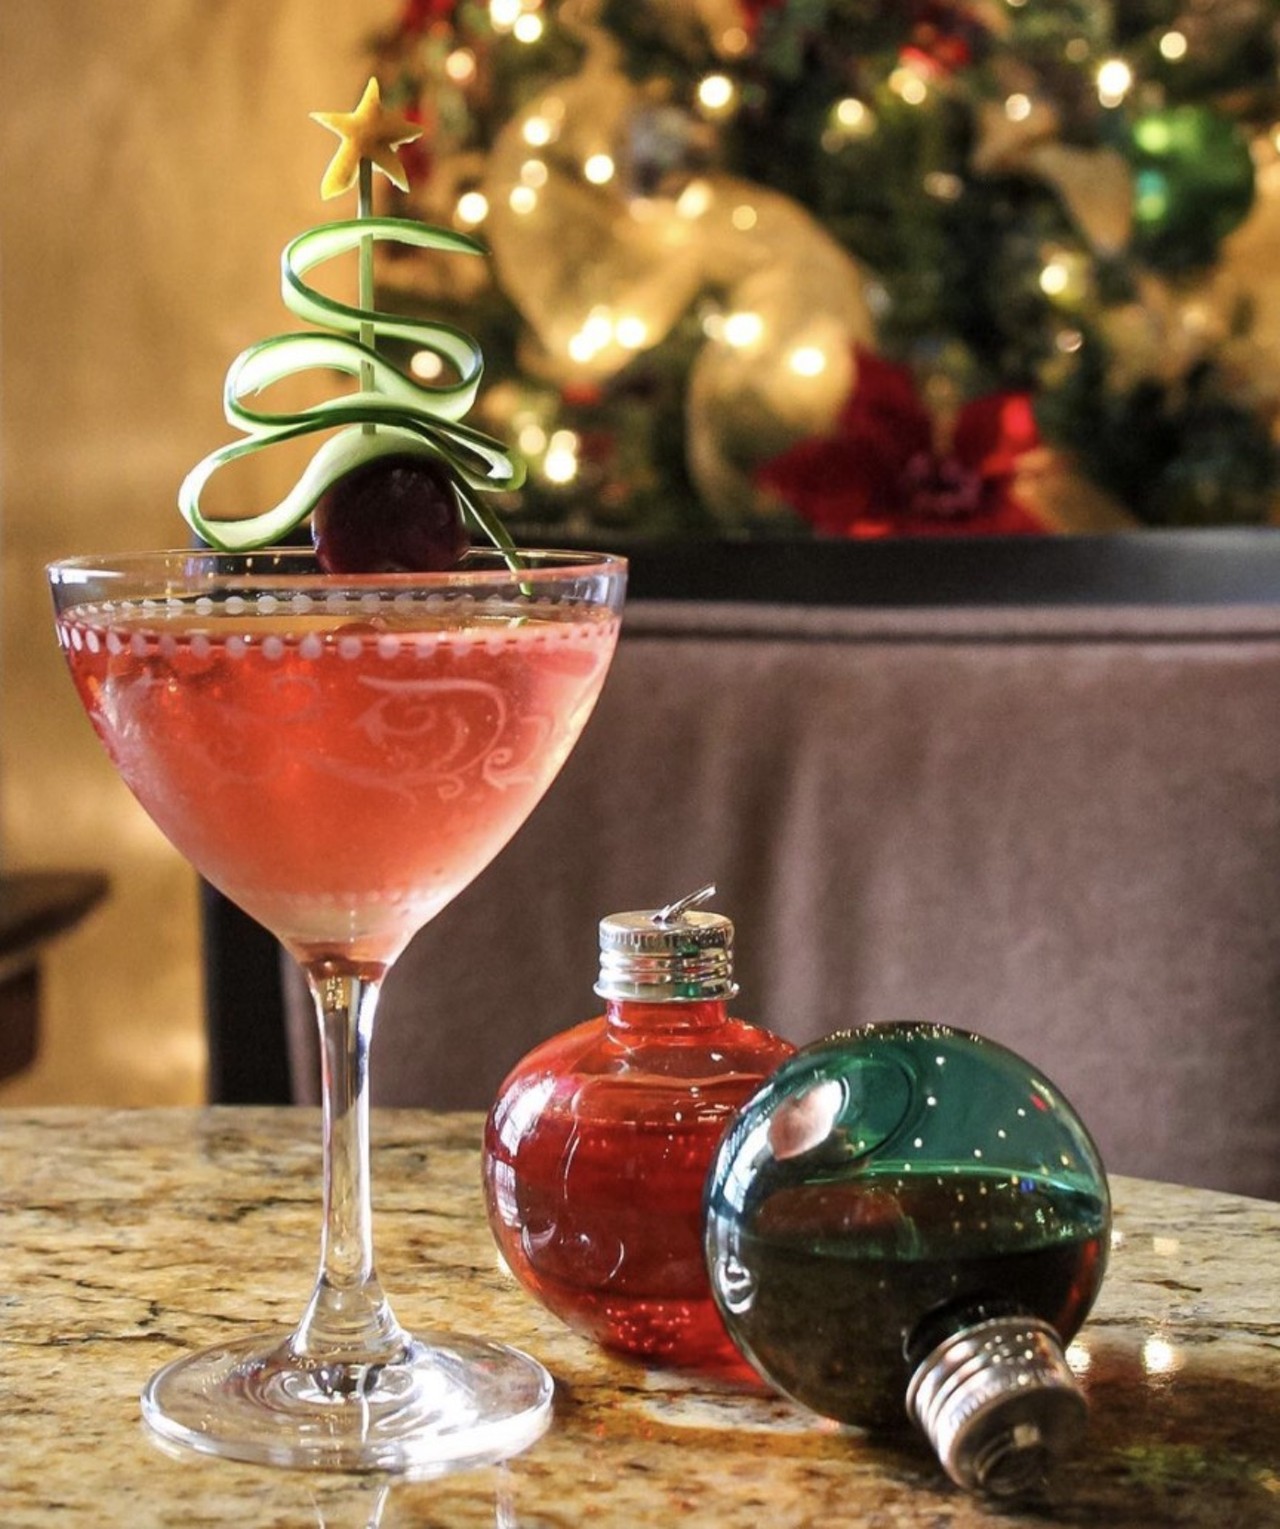 Visit a craft cocktail bar for a holiday libation
San Antonio's had an explosion in craft cocktail bars. Put down your Bud Light, call up a date and savor some amazing seasonal cocktails. 
Photo via Instagram / omnilamansiondelrio